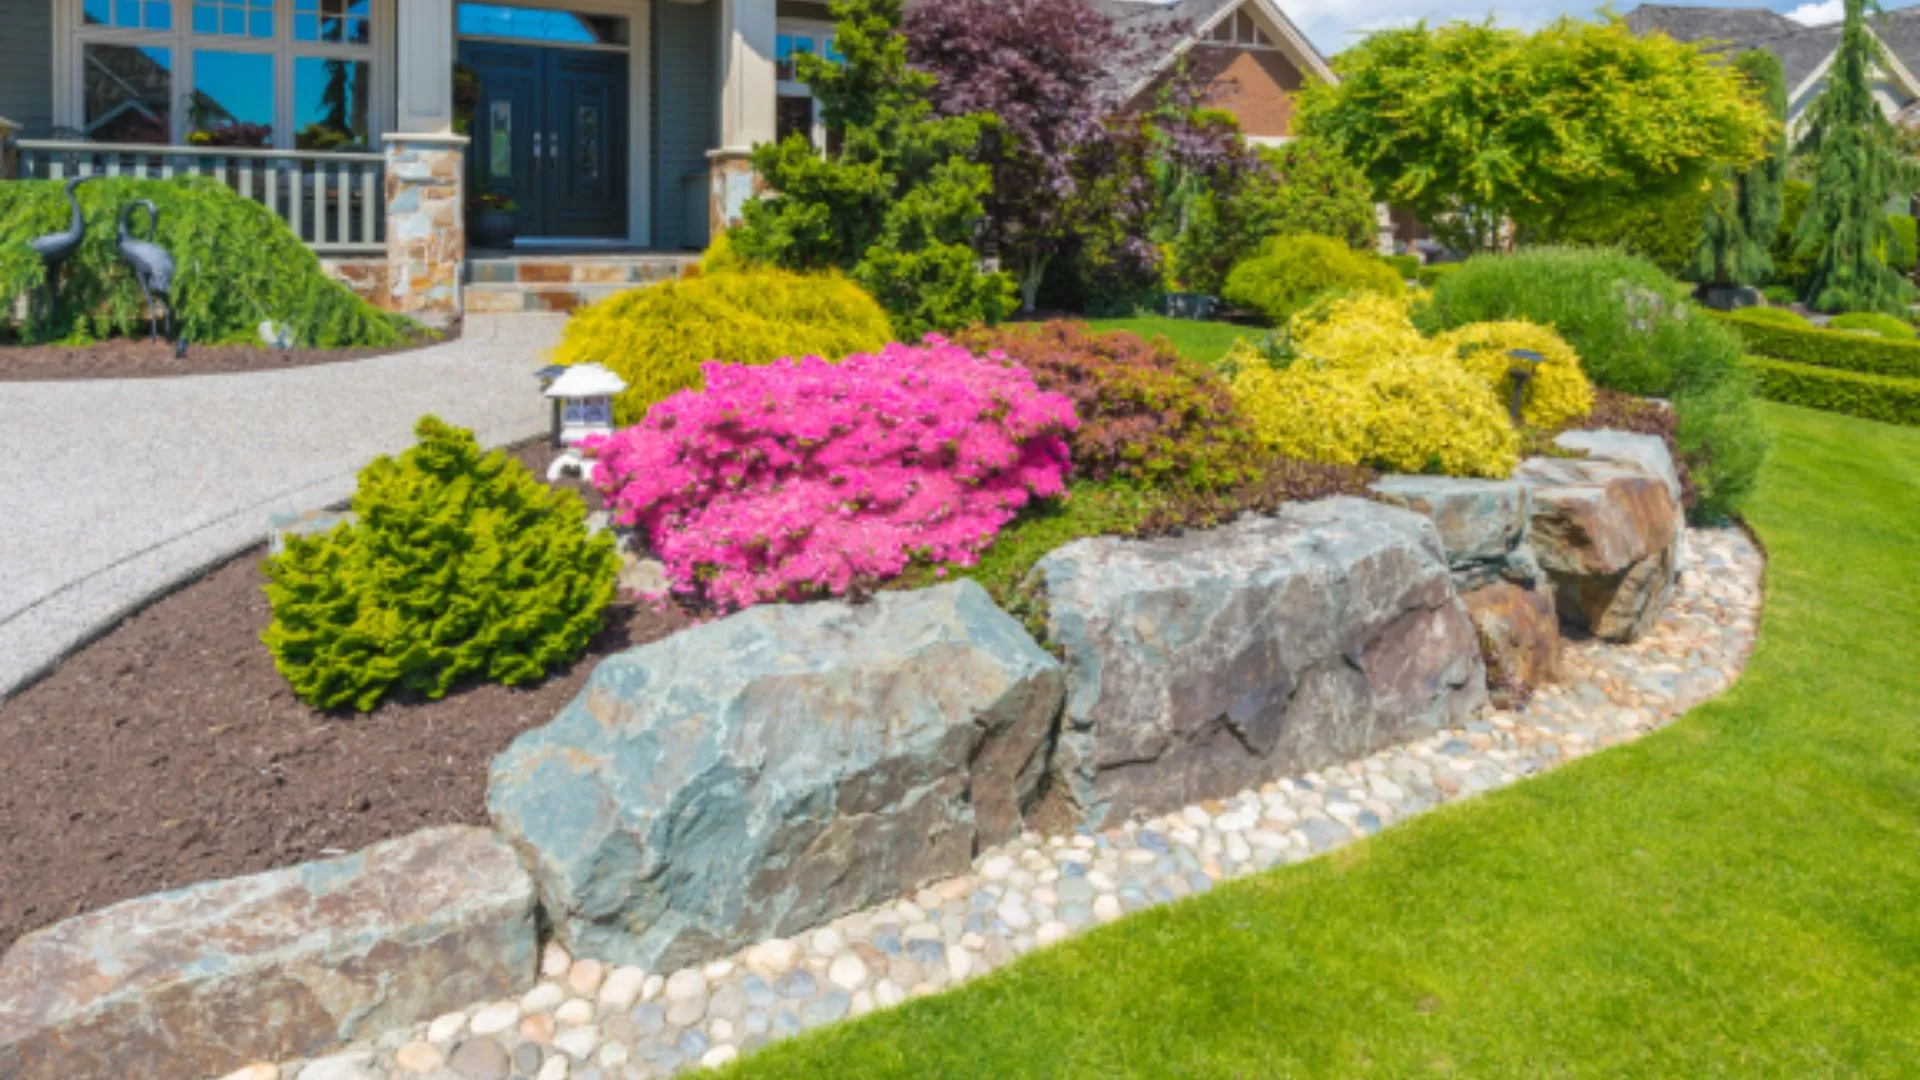 4 Simple Ways to Spruce up Your Landscape Beds for the Summer